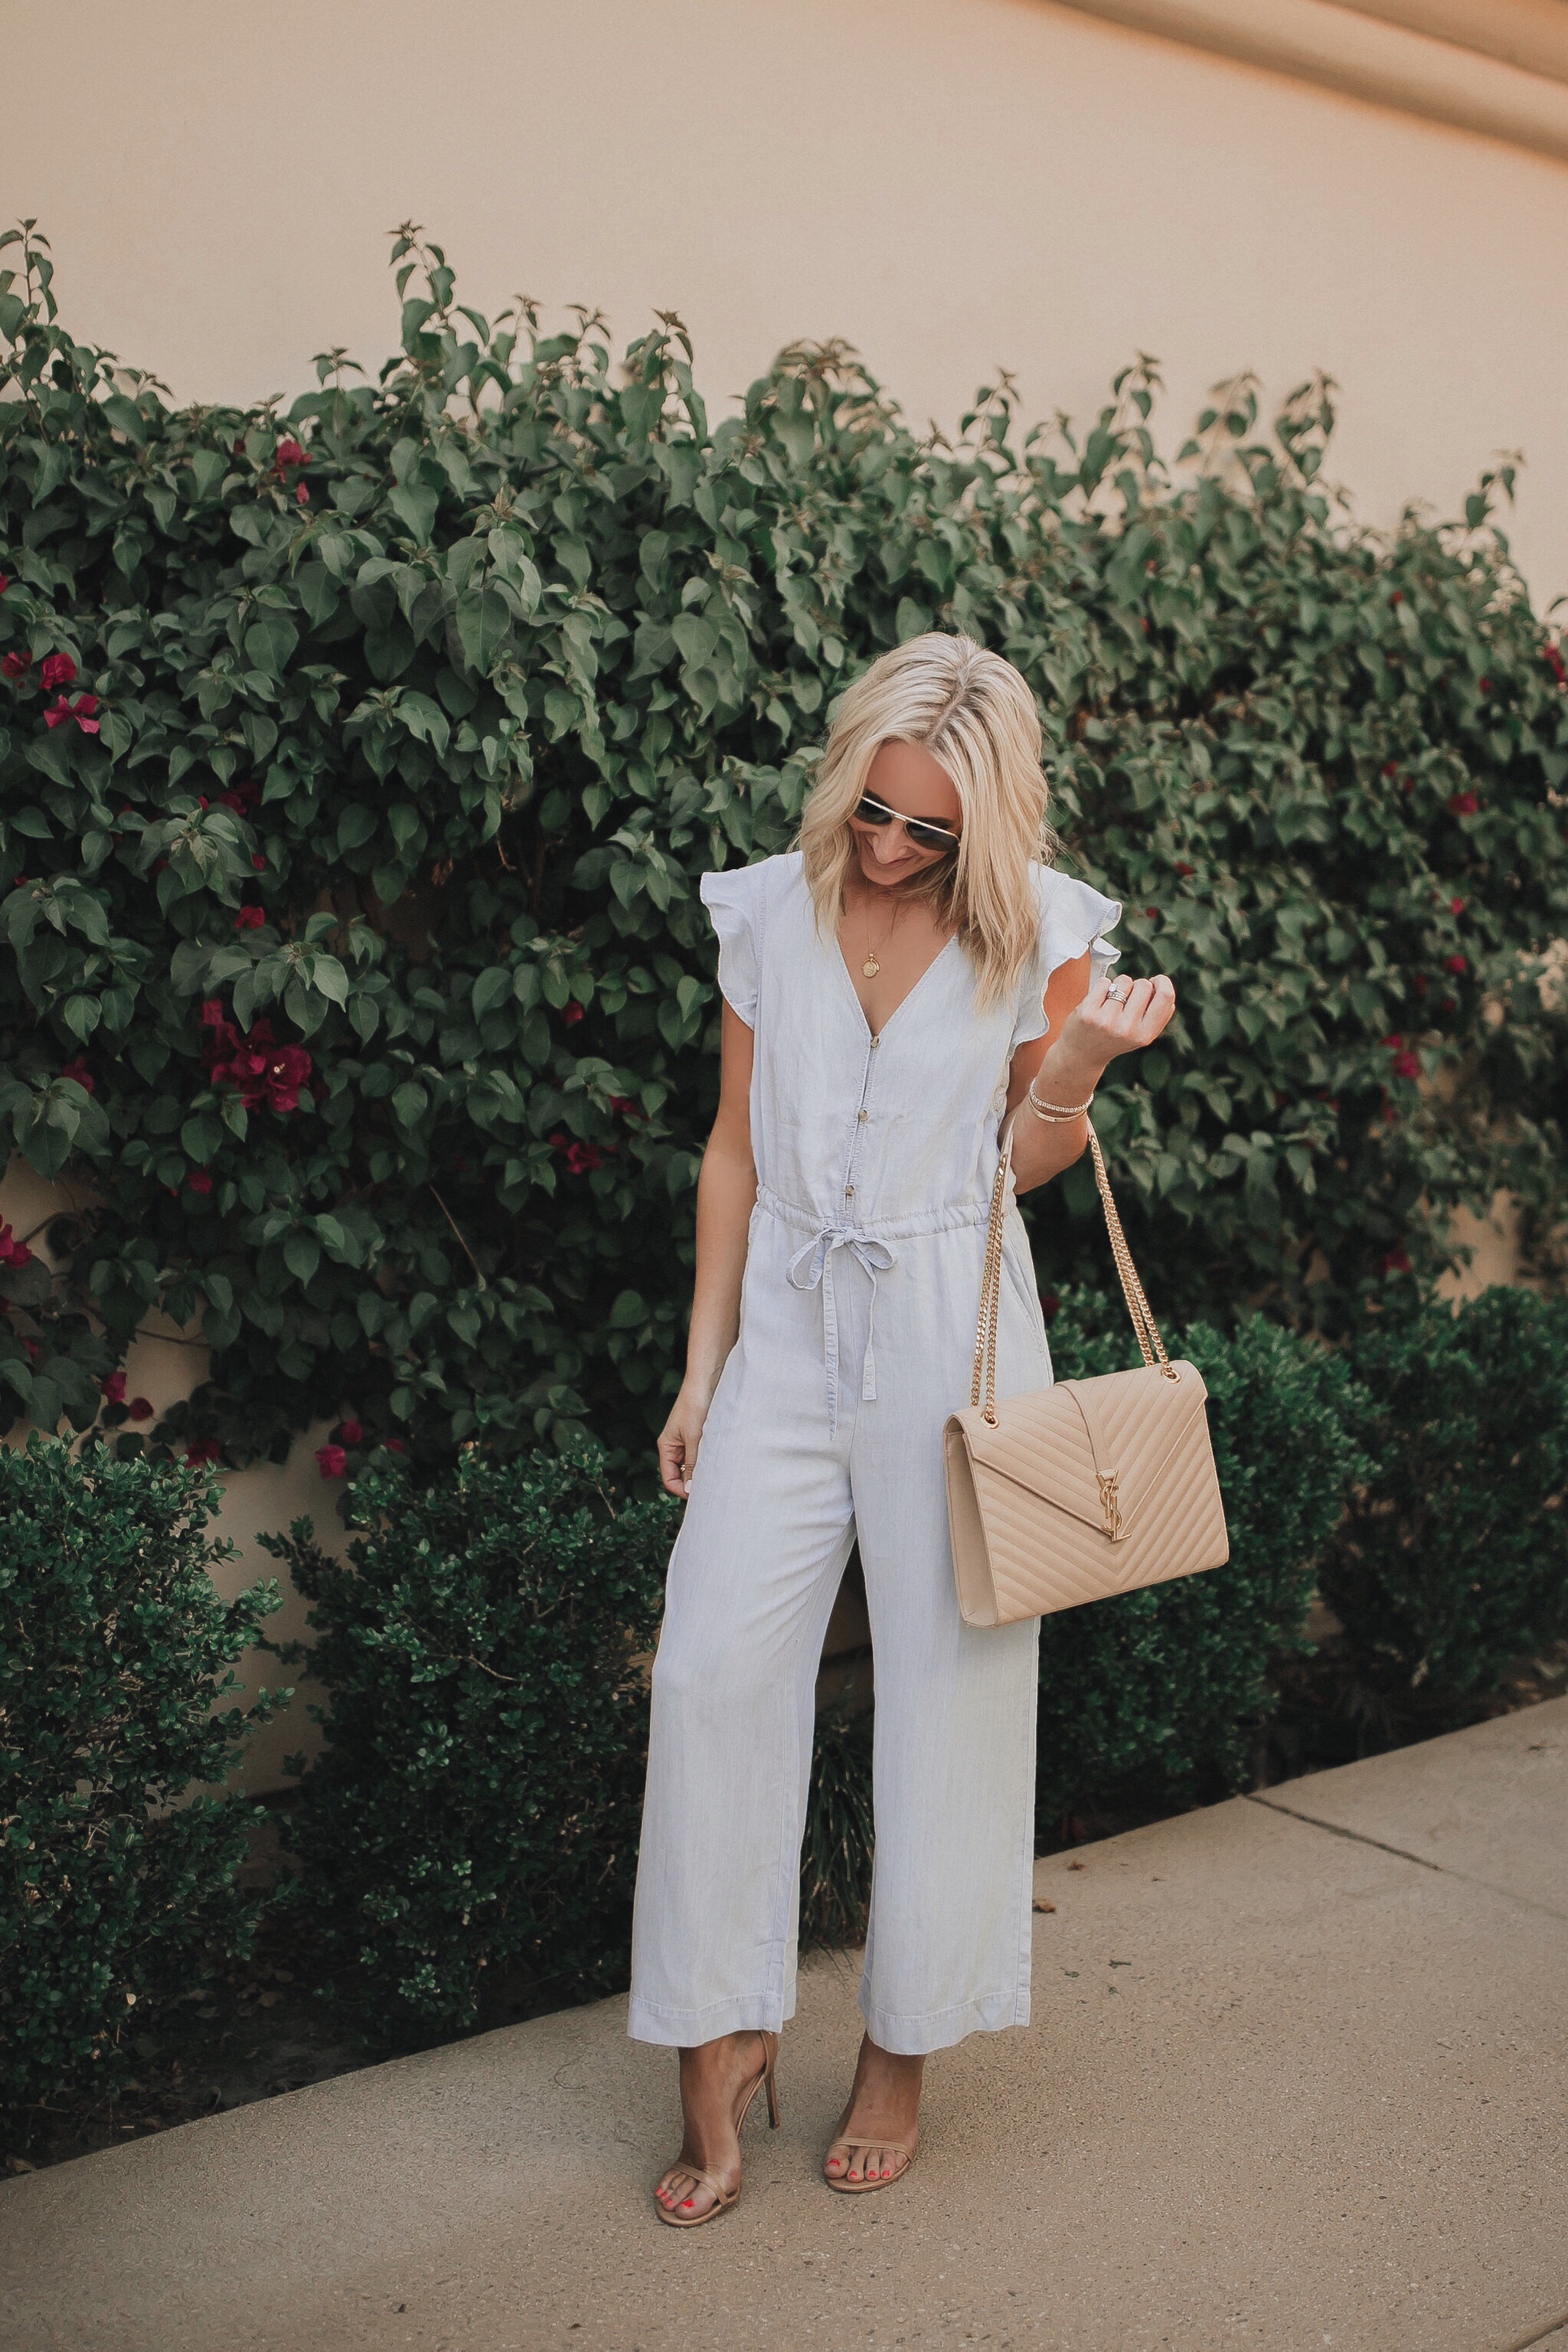 Emily Farren Wieczorek of Two Peas in a Prada shares her favorite items from all of the amazing Memorial Day Weekend Sales going on right now! This is a post you don't want to miss! 